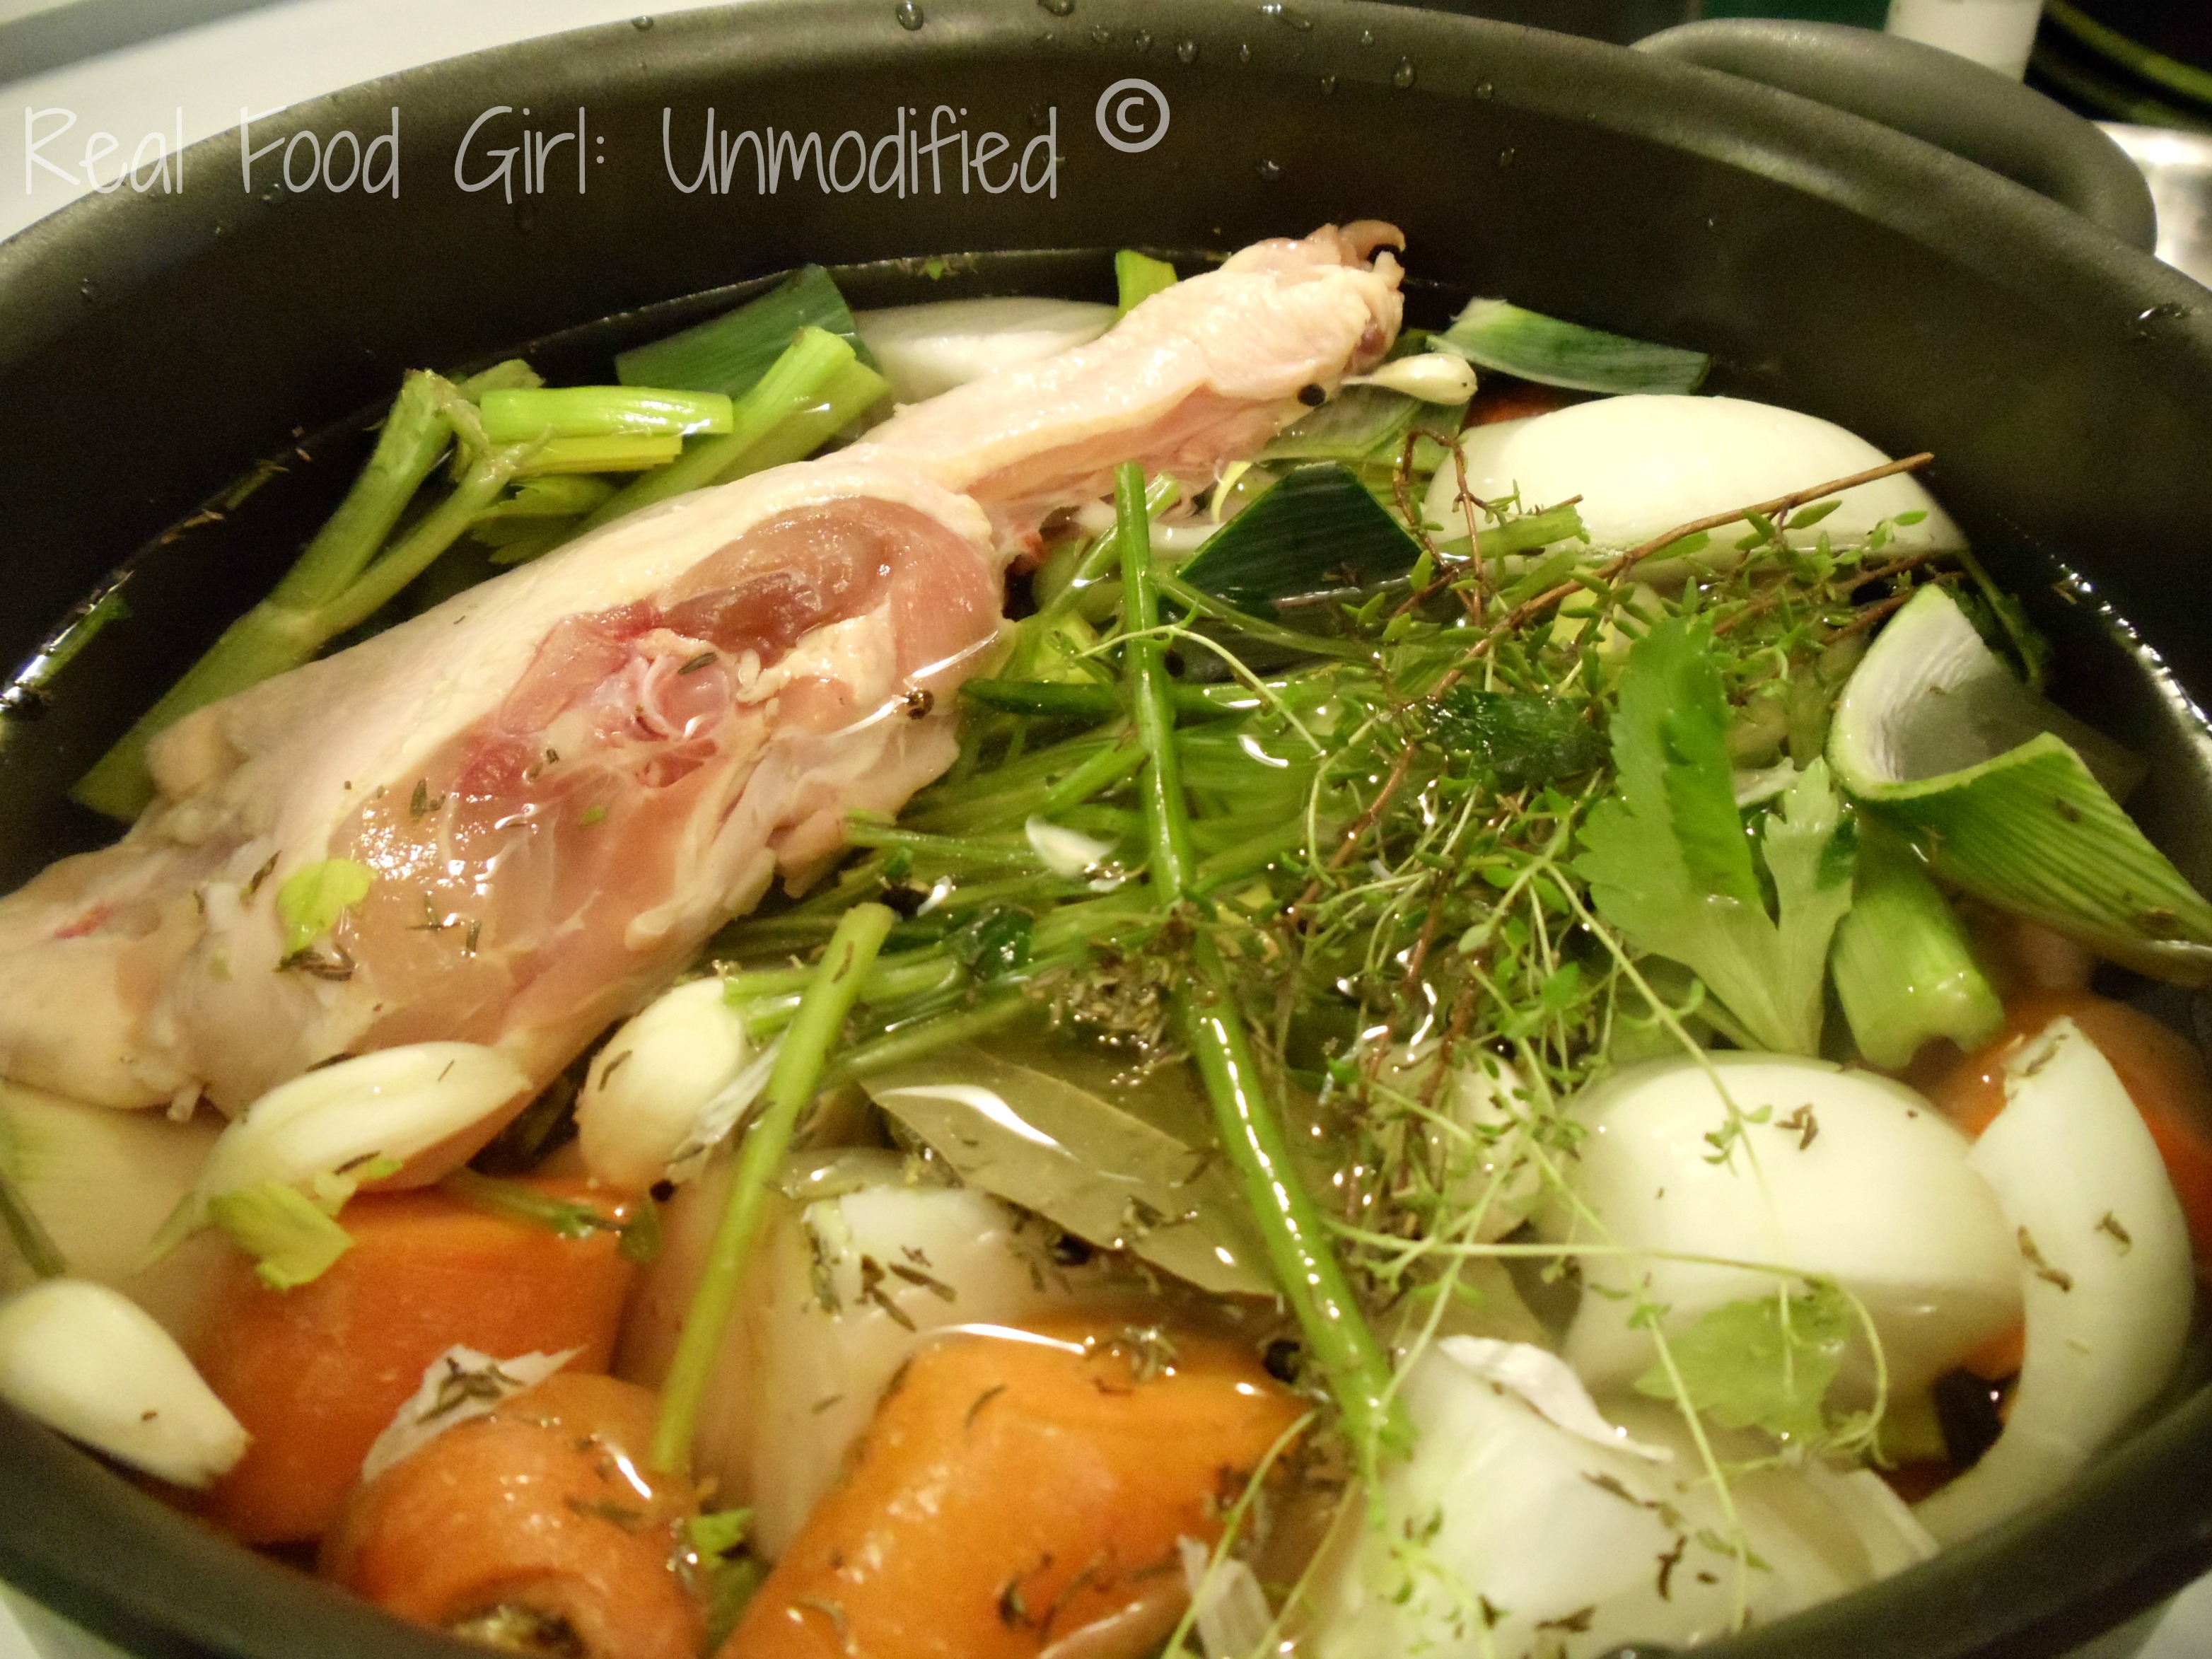 Organic Homemade Chicken Stock. Easy, healthy, affordable! From Real Food Girl: Unmodified